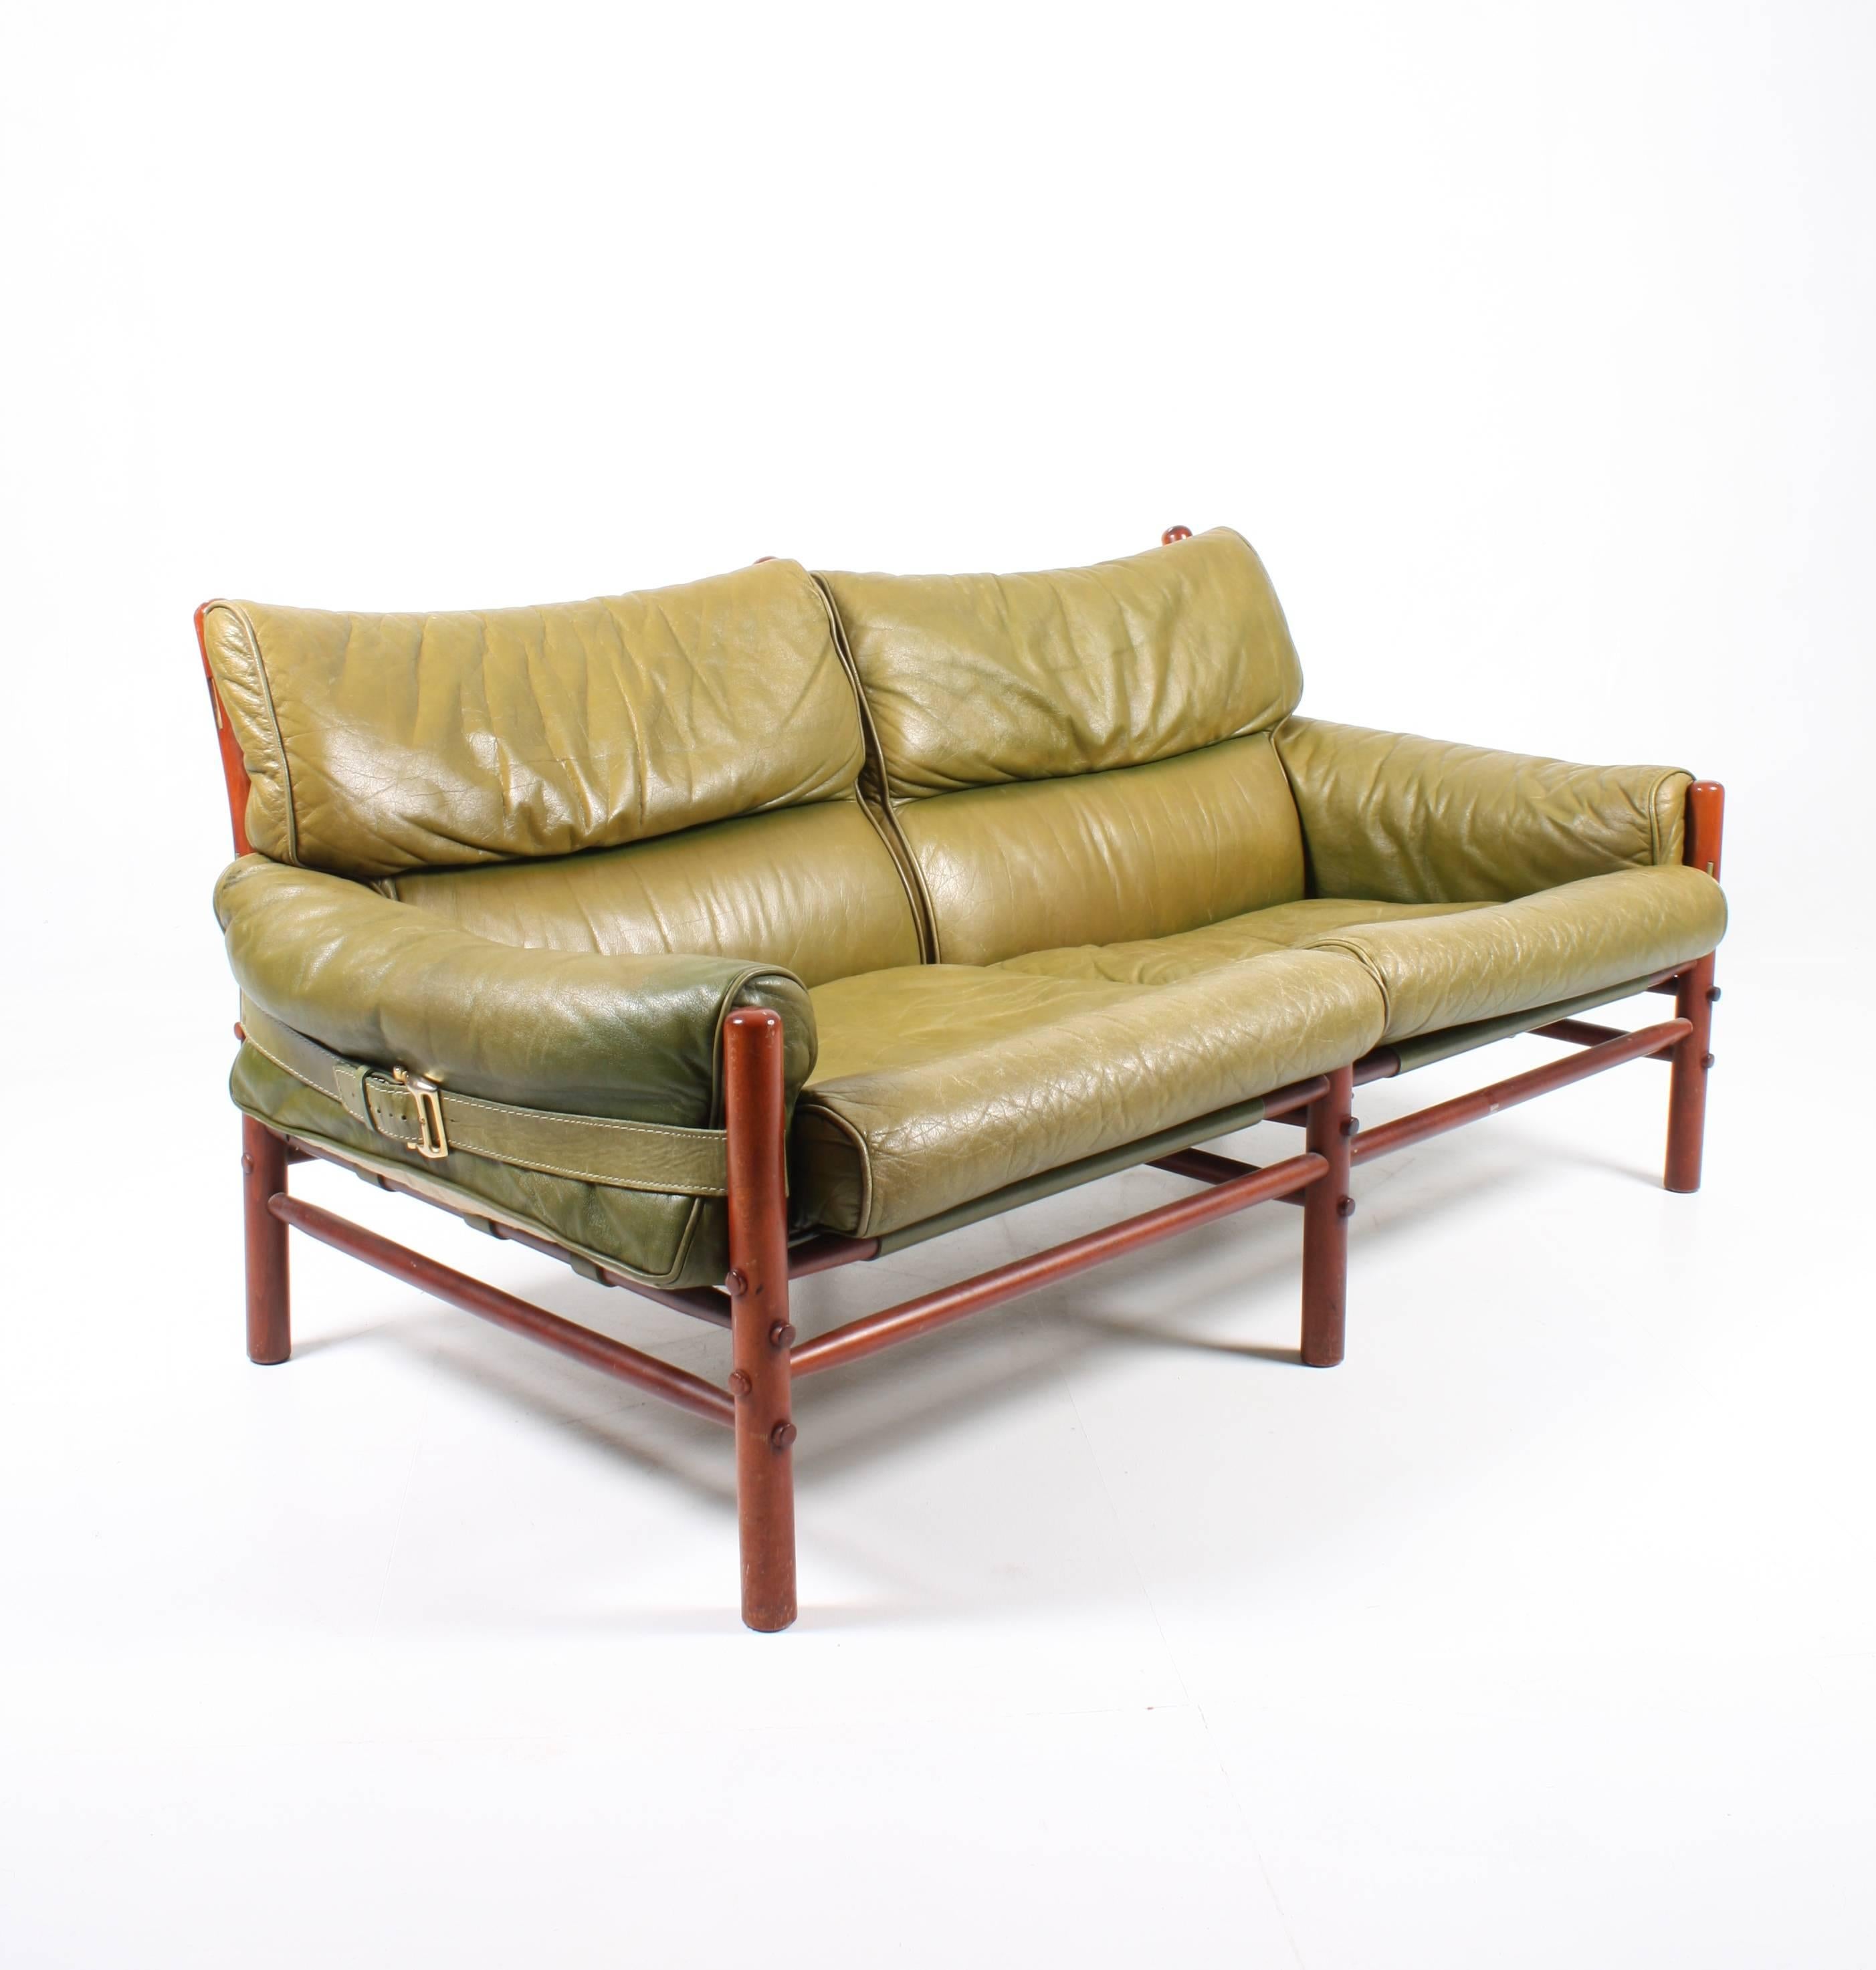 Sofa in patinated green leather and solid wood frame. designed by Arne Norell for Norell Møbel AB in the mid-1960s. A Very comfortable sofa in timeless design and quality. Made in Sweden.